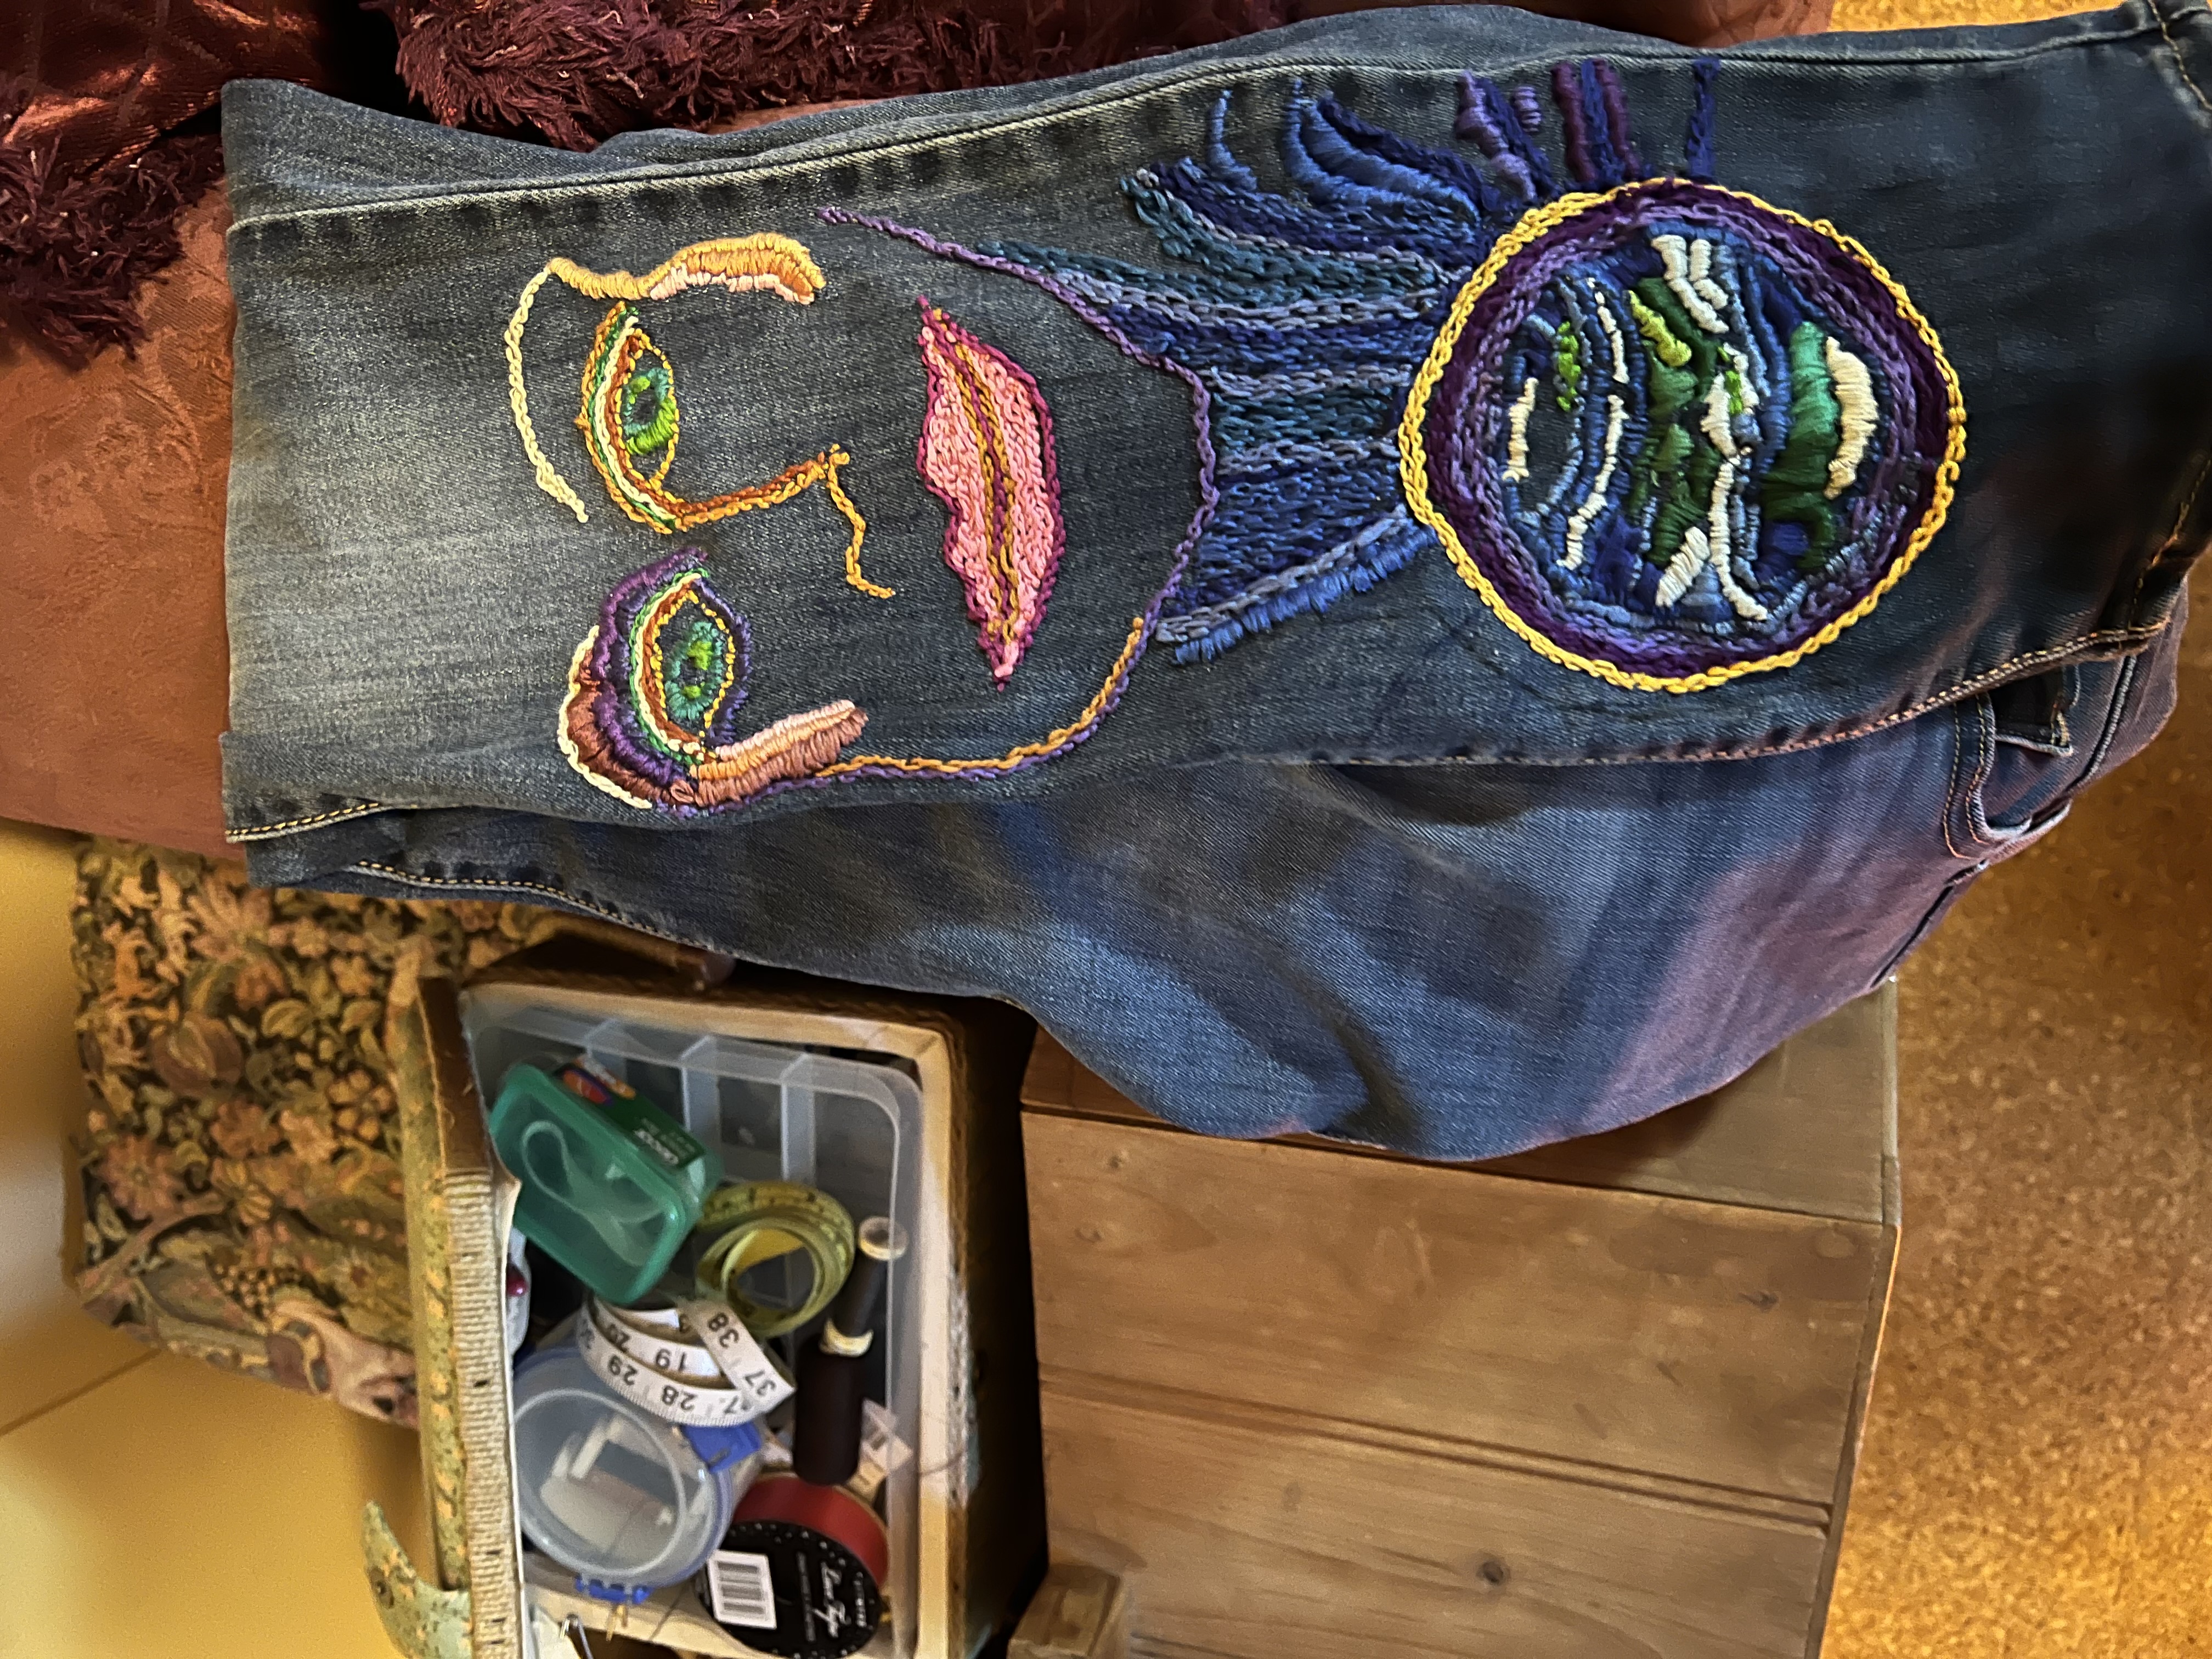 Embroidery on a pair of jeans